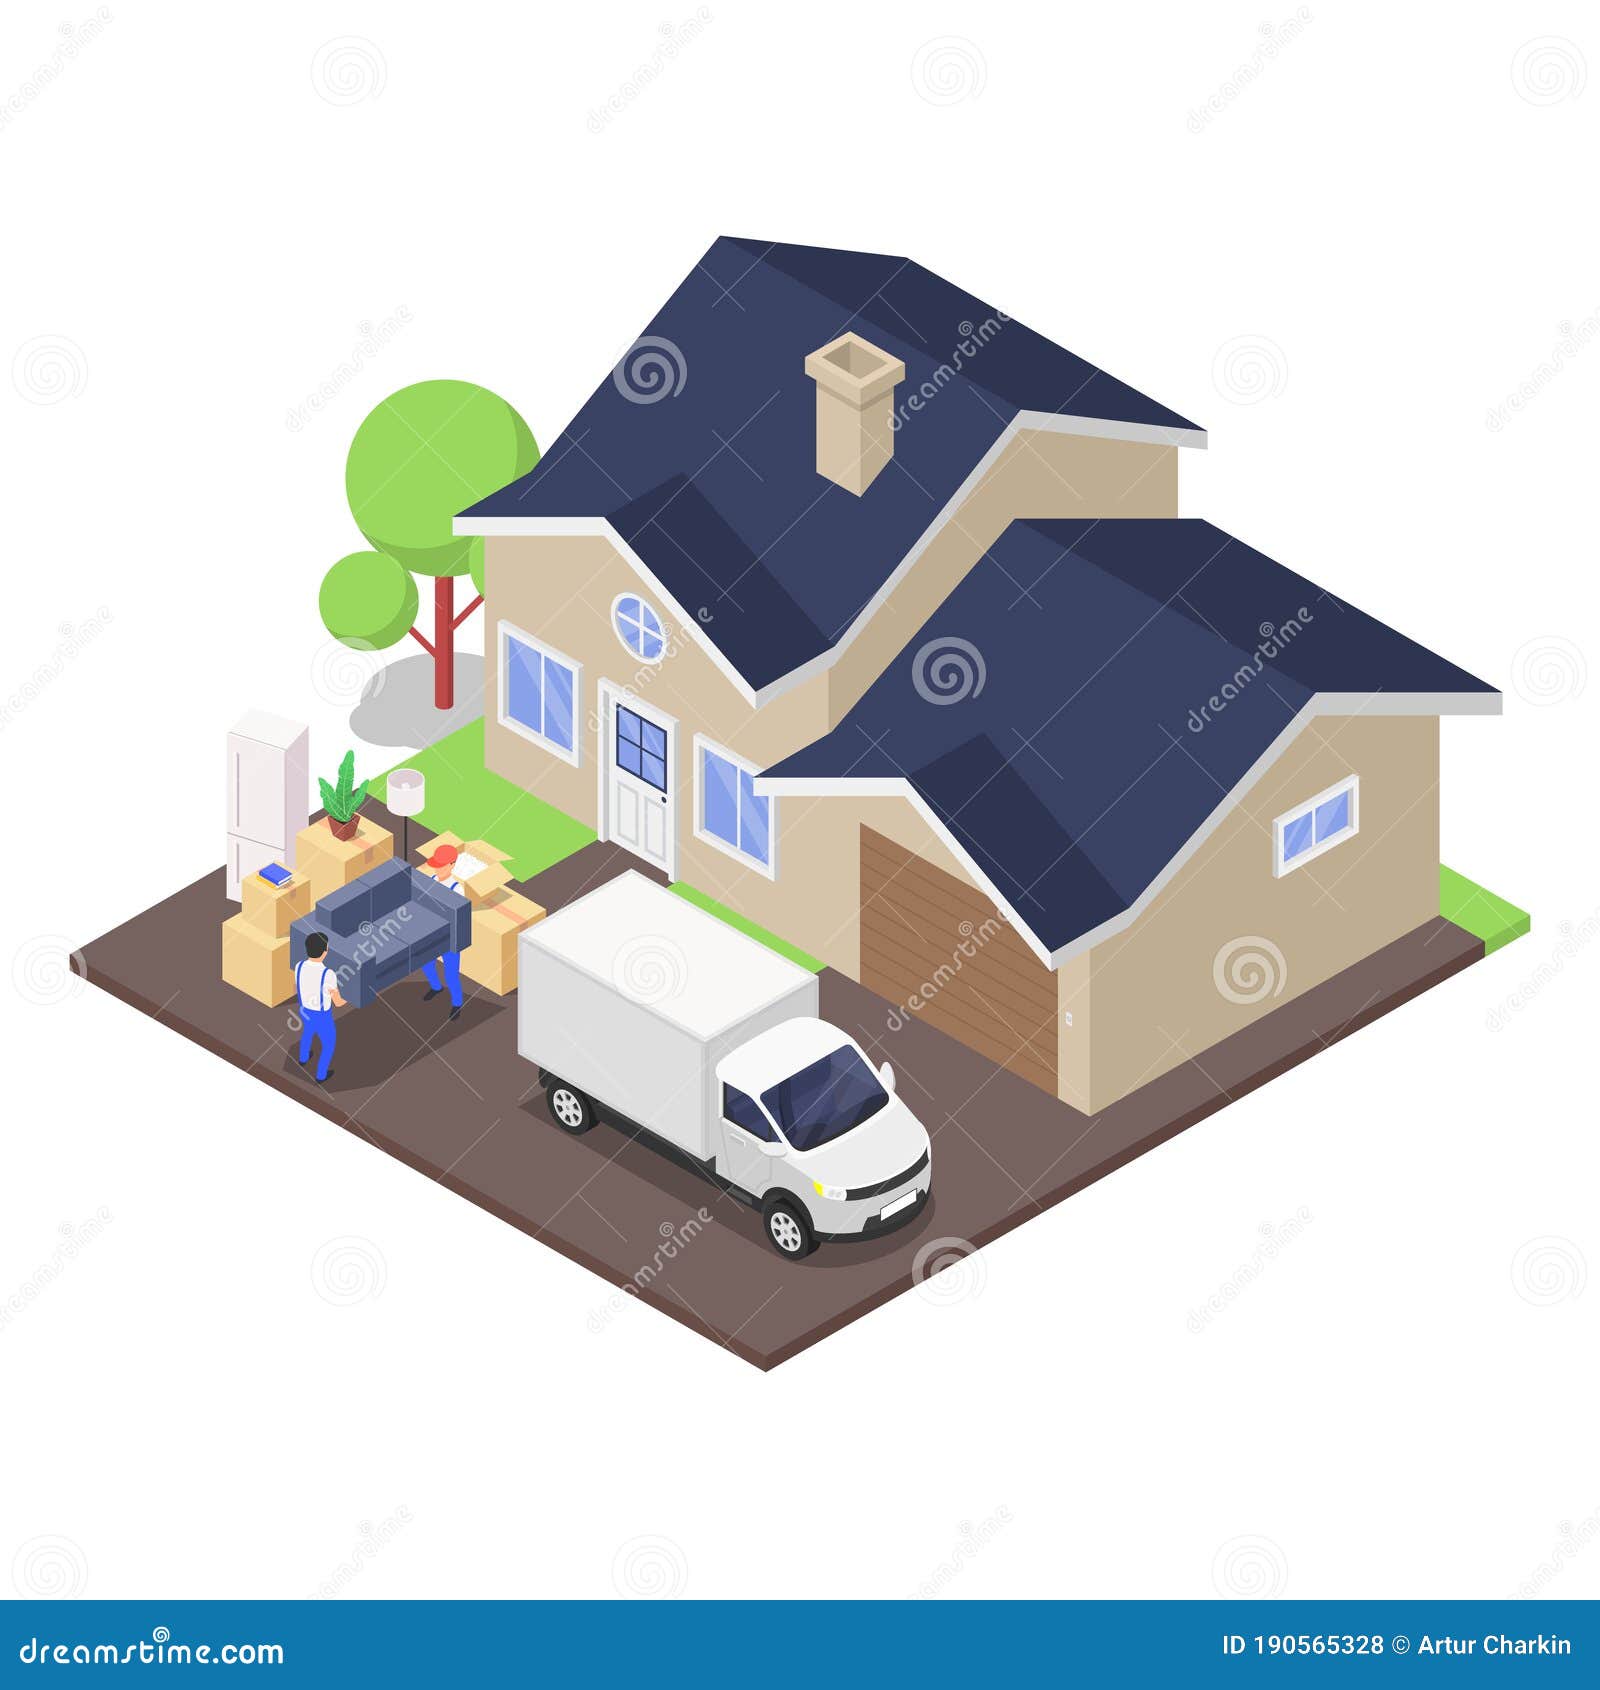 https://thumbs.dreamstime.com/z/home-moving-concept-movers-unloading-truck-packed-corton-boxes-various-household-items-vector-isometric-illustration-190565328.jpg